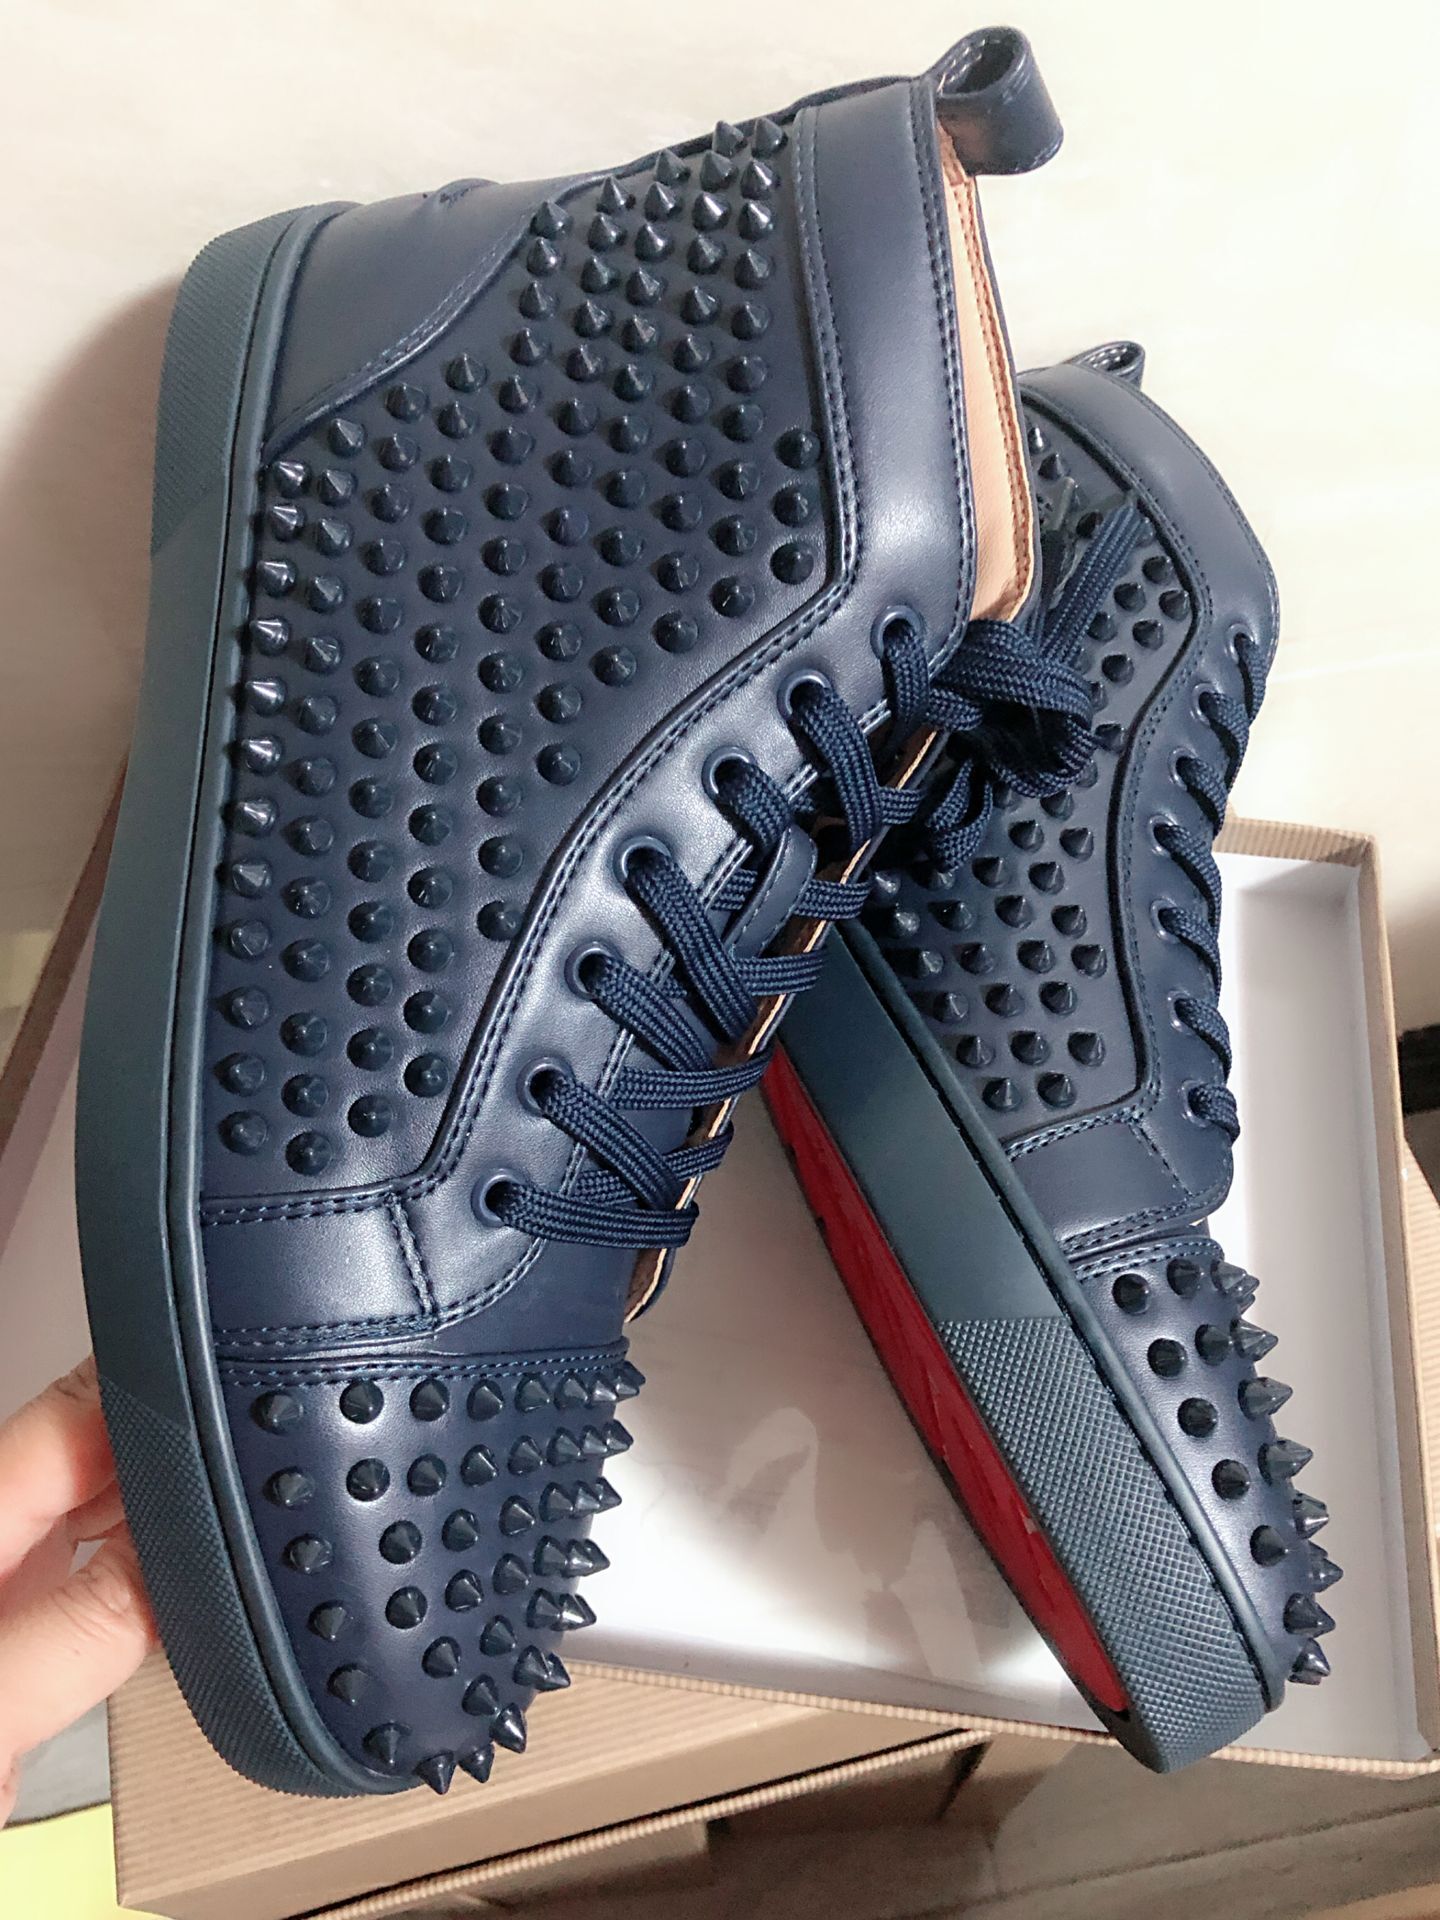 

Paris Homme Red Bottom Sneakers Men's casual Shoes Full Spiked Flats Navy Blue Rivets Red-soles Highs Tops High Quality Man Trainers EU35-47, As pics show